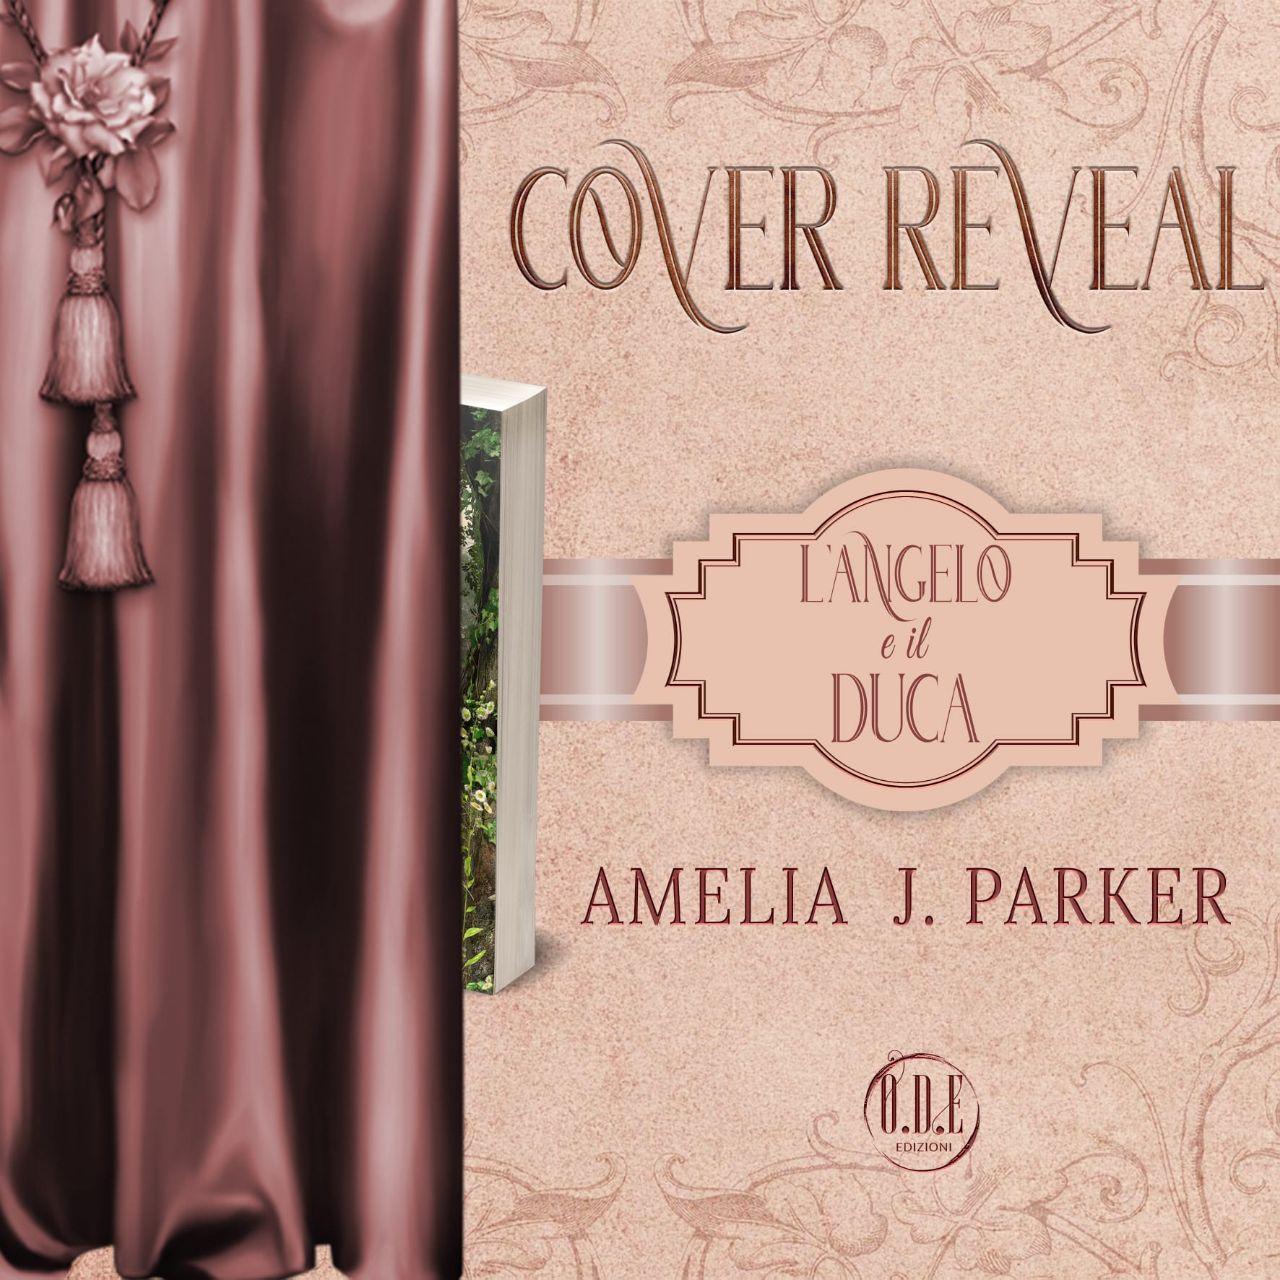 Cover Reveal “L’angelo e il duca”- OurFreeTime